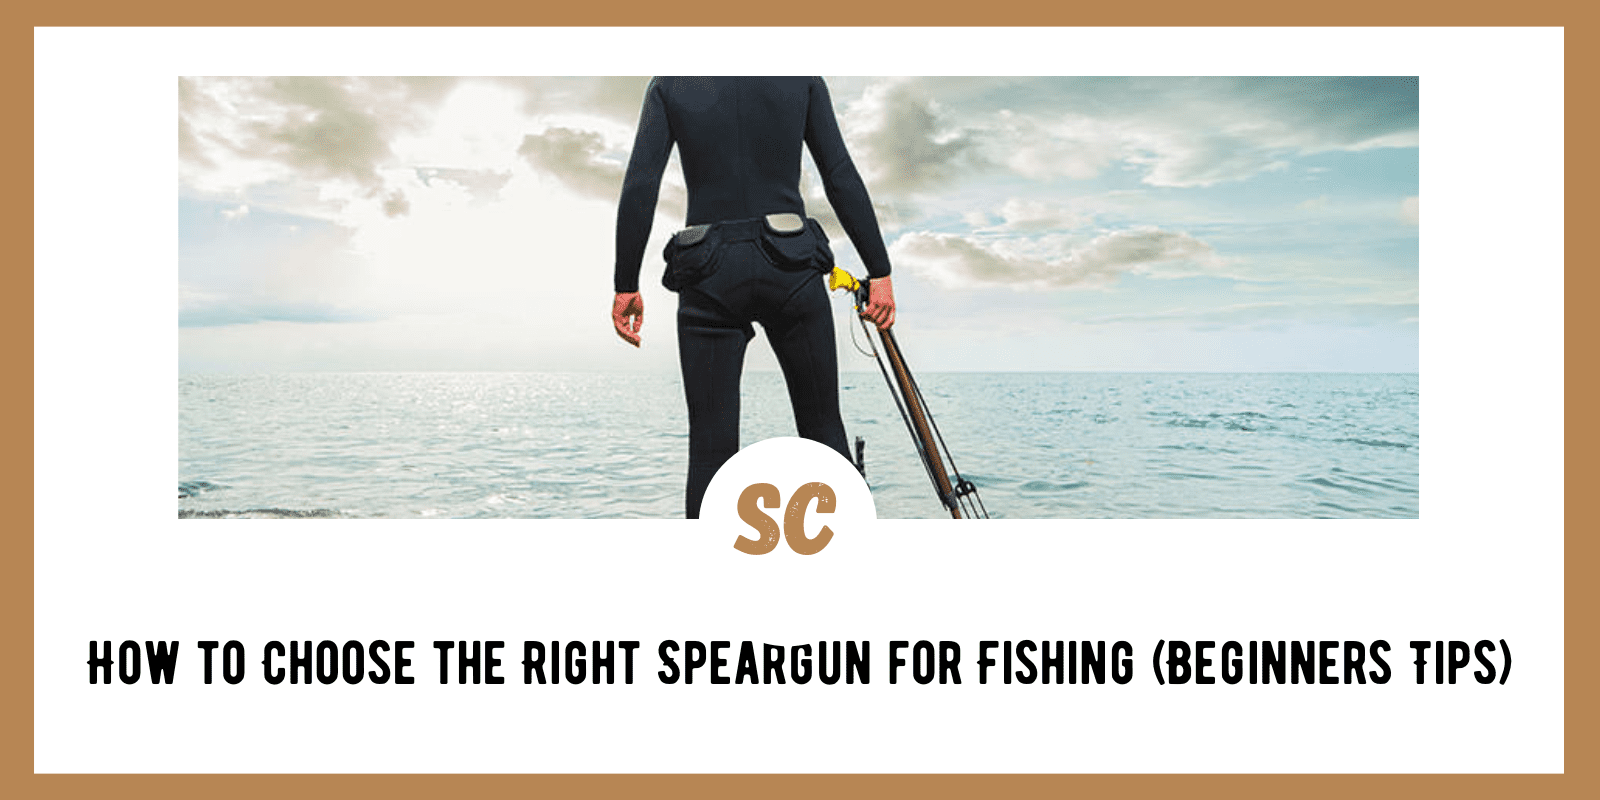 How to Choose the Right Speargun for Fishing (Beginners Tips)